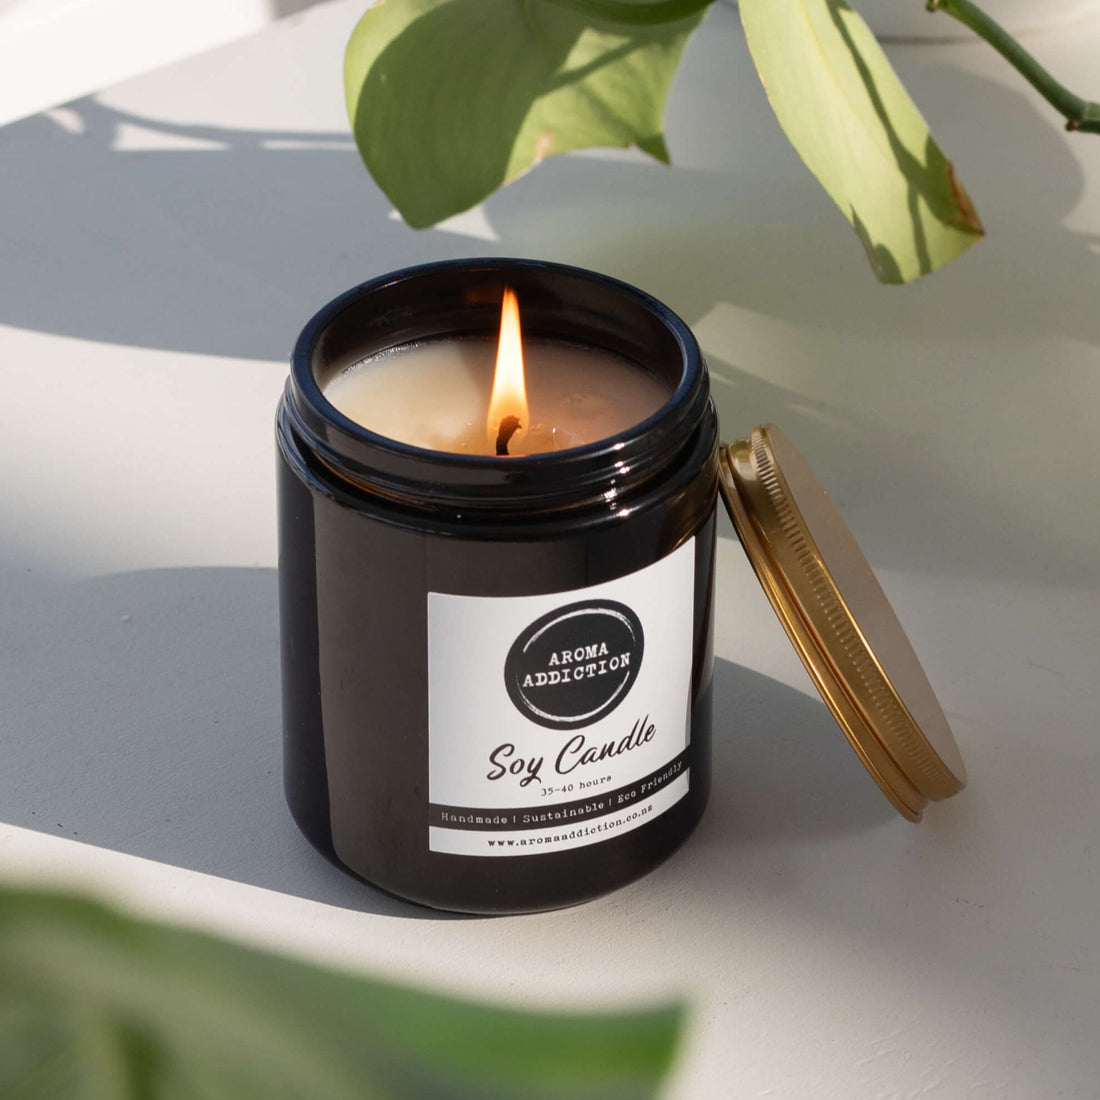 All Soy Candle